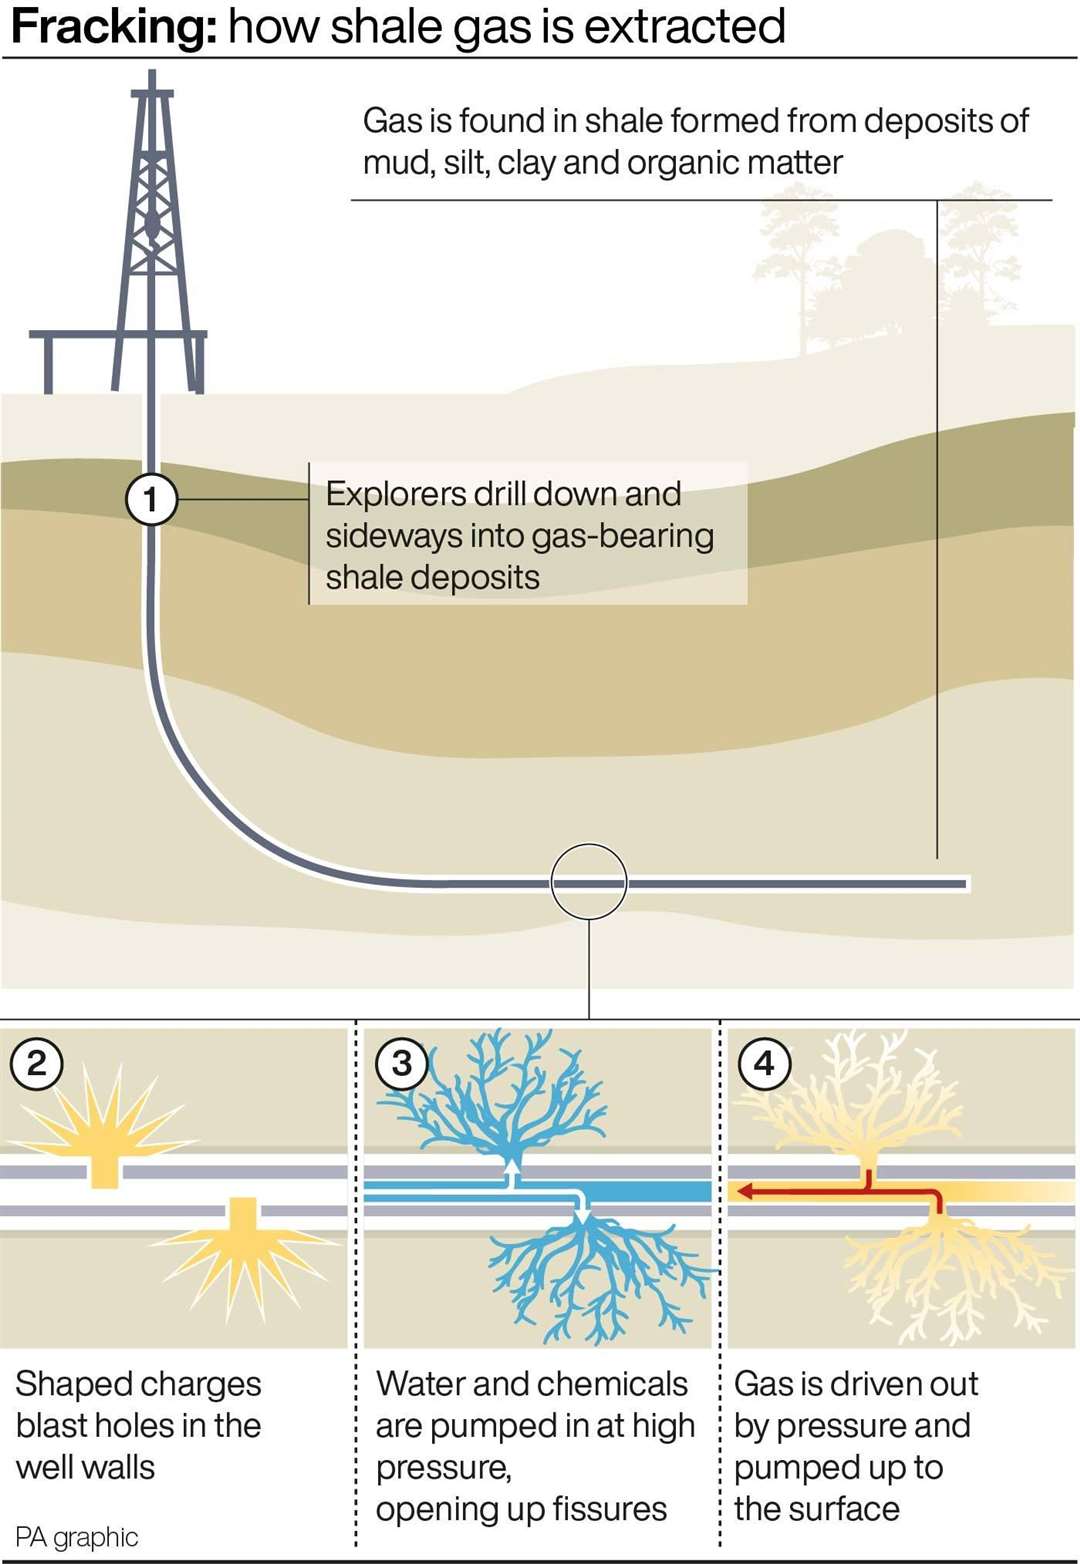 How fracking produces shale gas (PA Graphics)